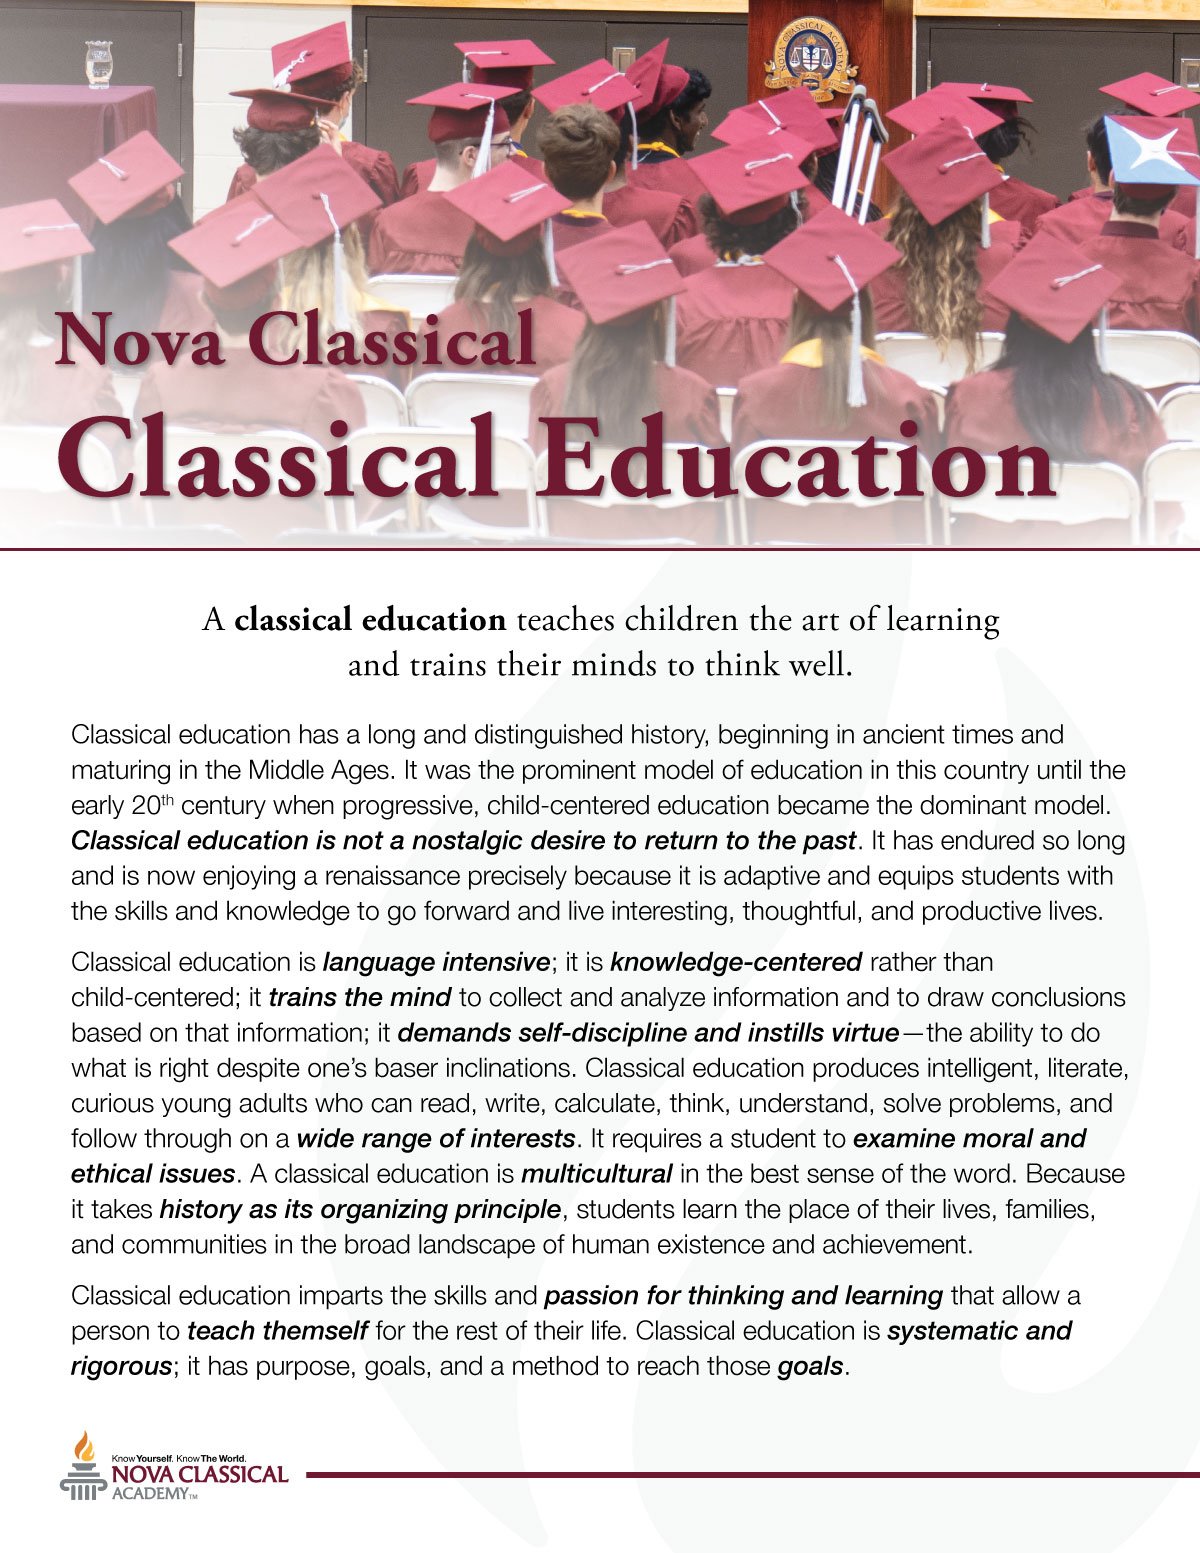 About Classical Education - Nova Classical Academy